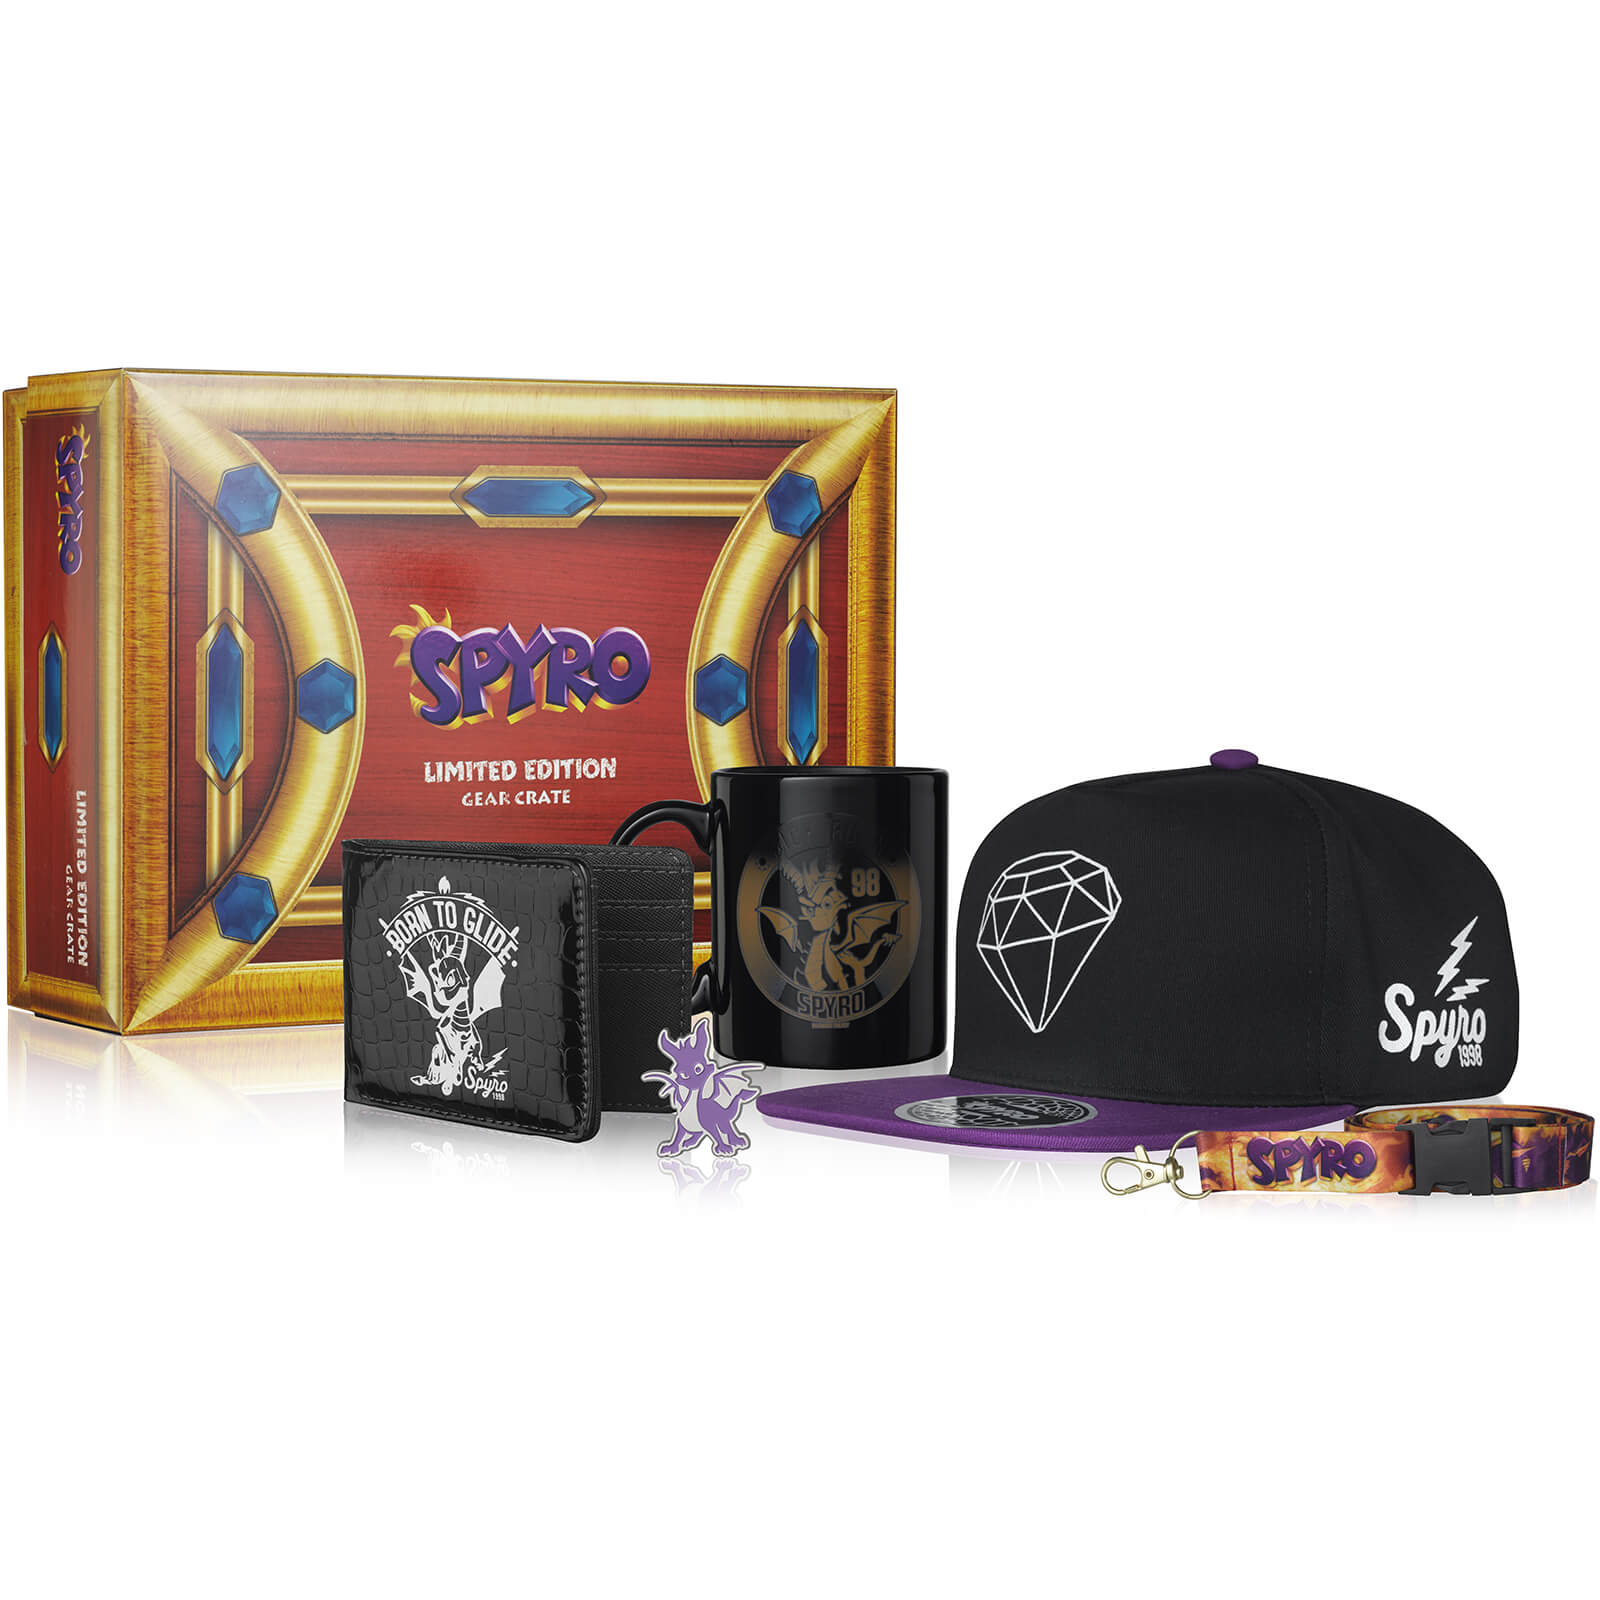 Spyro Limited Edition Gear Crate